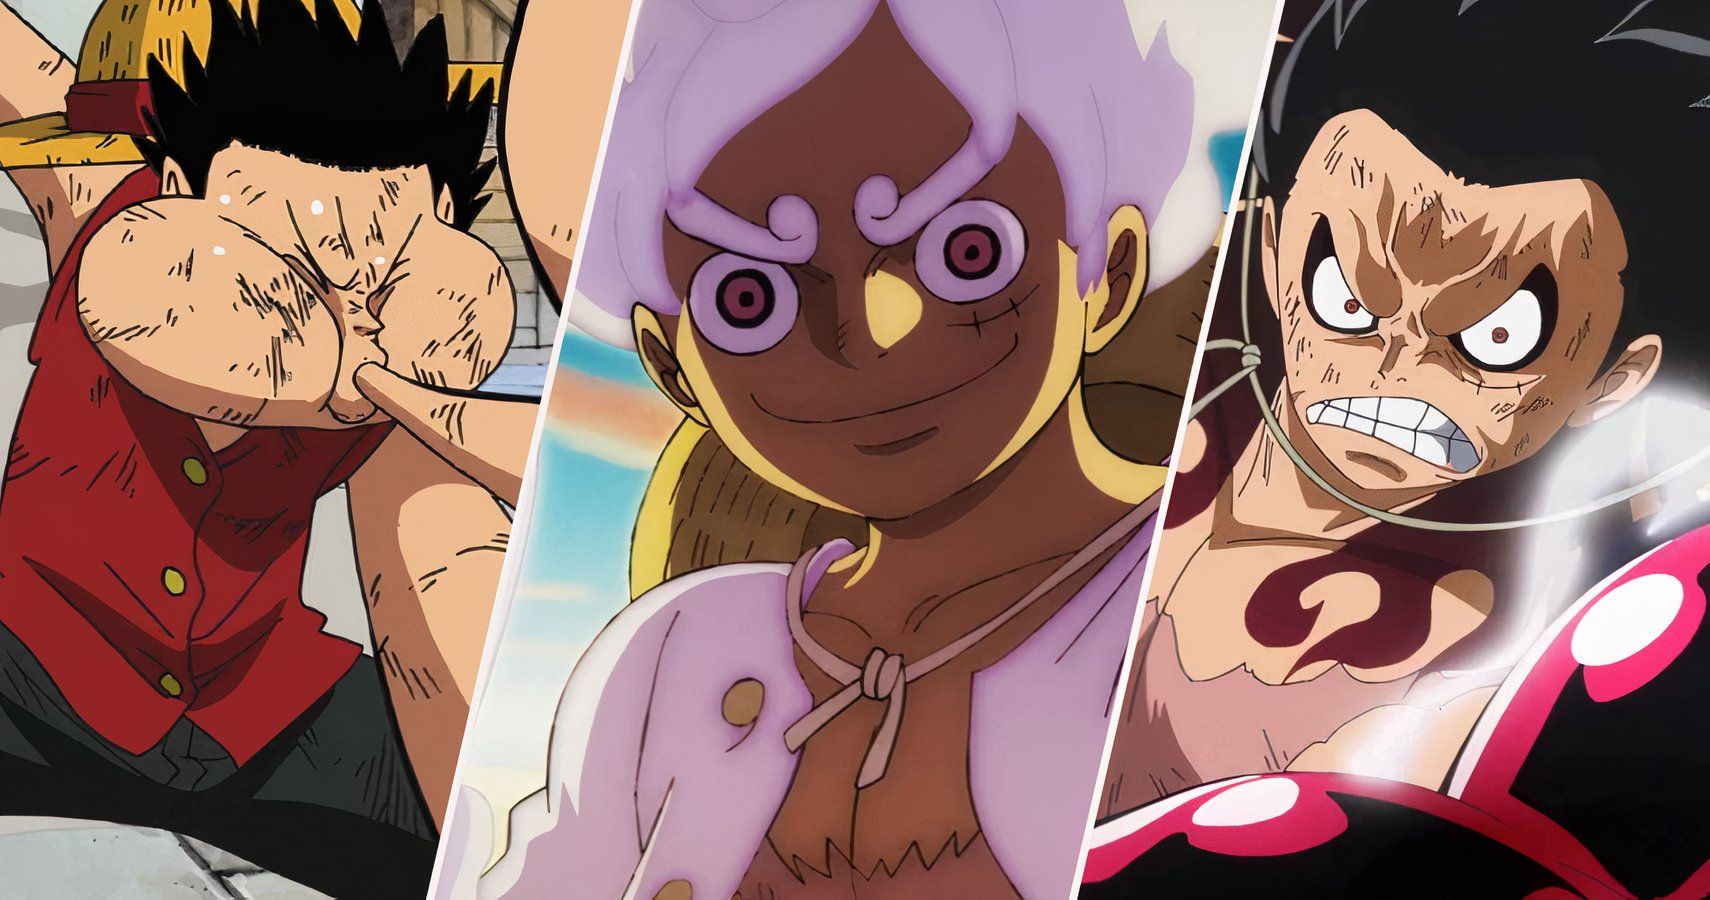 Gear 3 Luffy, Gear 5 Luffy, and Gear 4 Luffy from the One Piece anime